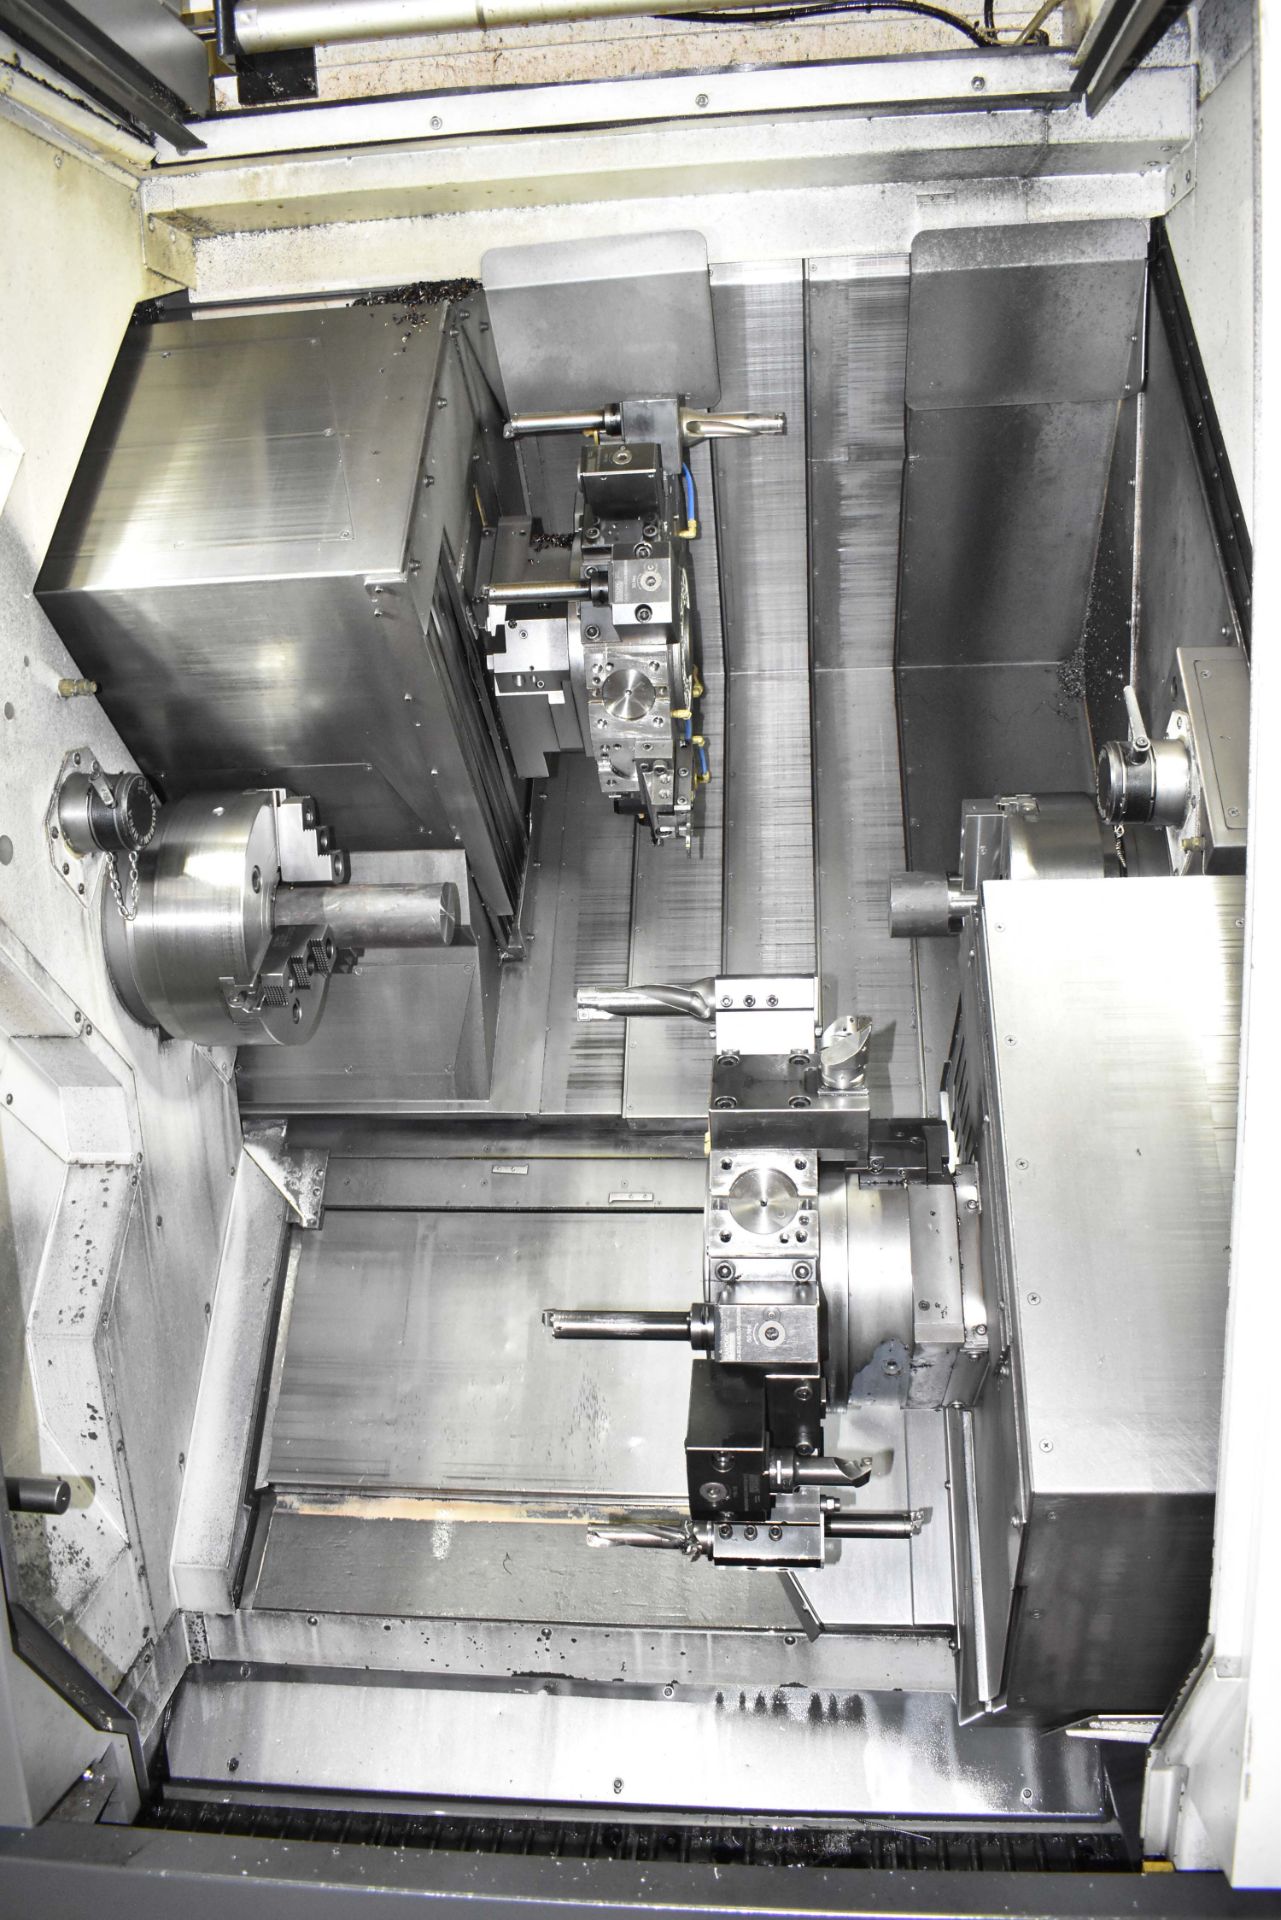 NAKAMURA-TOME (2018) WT-300 MMYS BIG BORE 7-AXIS OPPOSED SPINDLE AND TWIN TURRET CNC MULTI-TASKING - Image 2 of 14